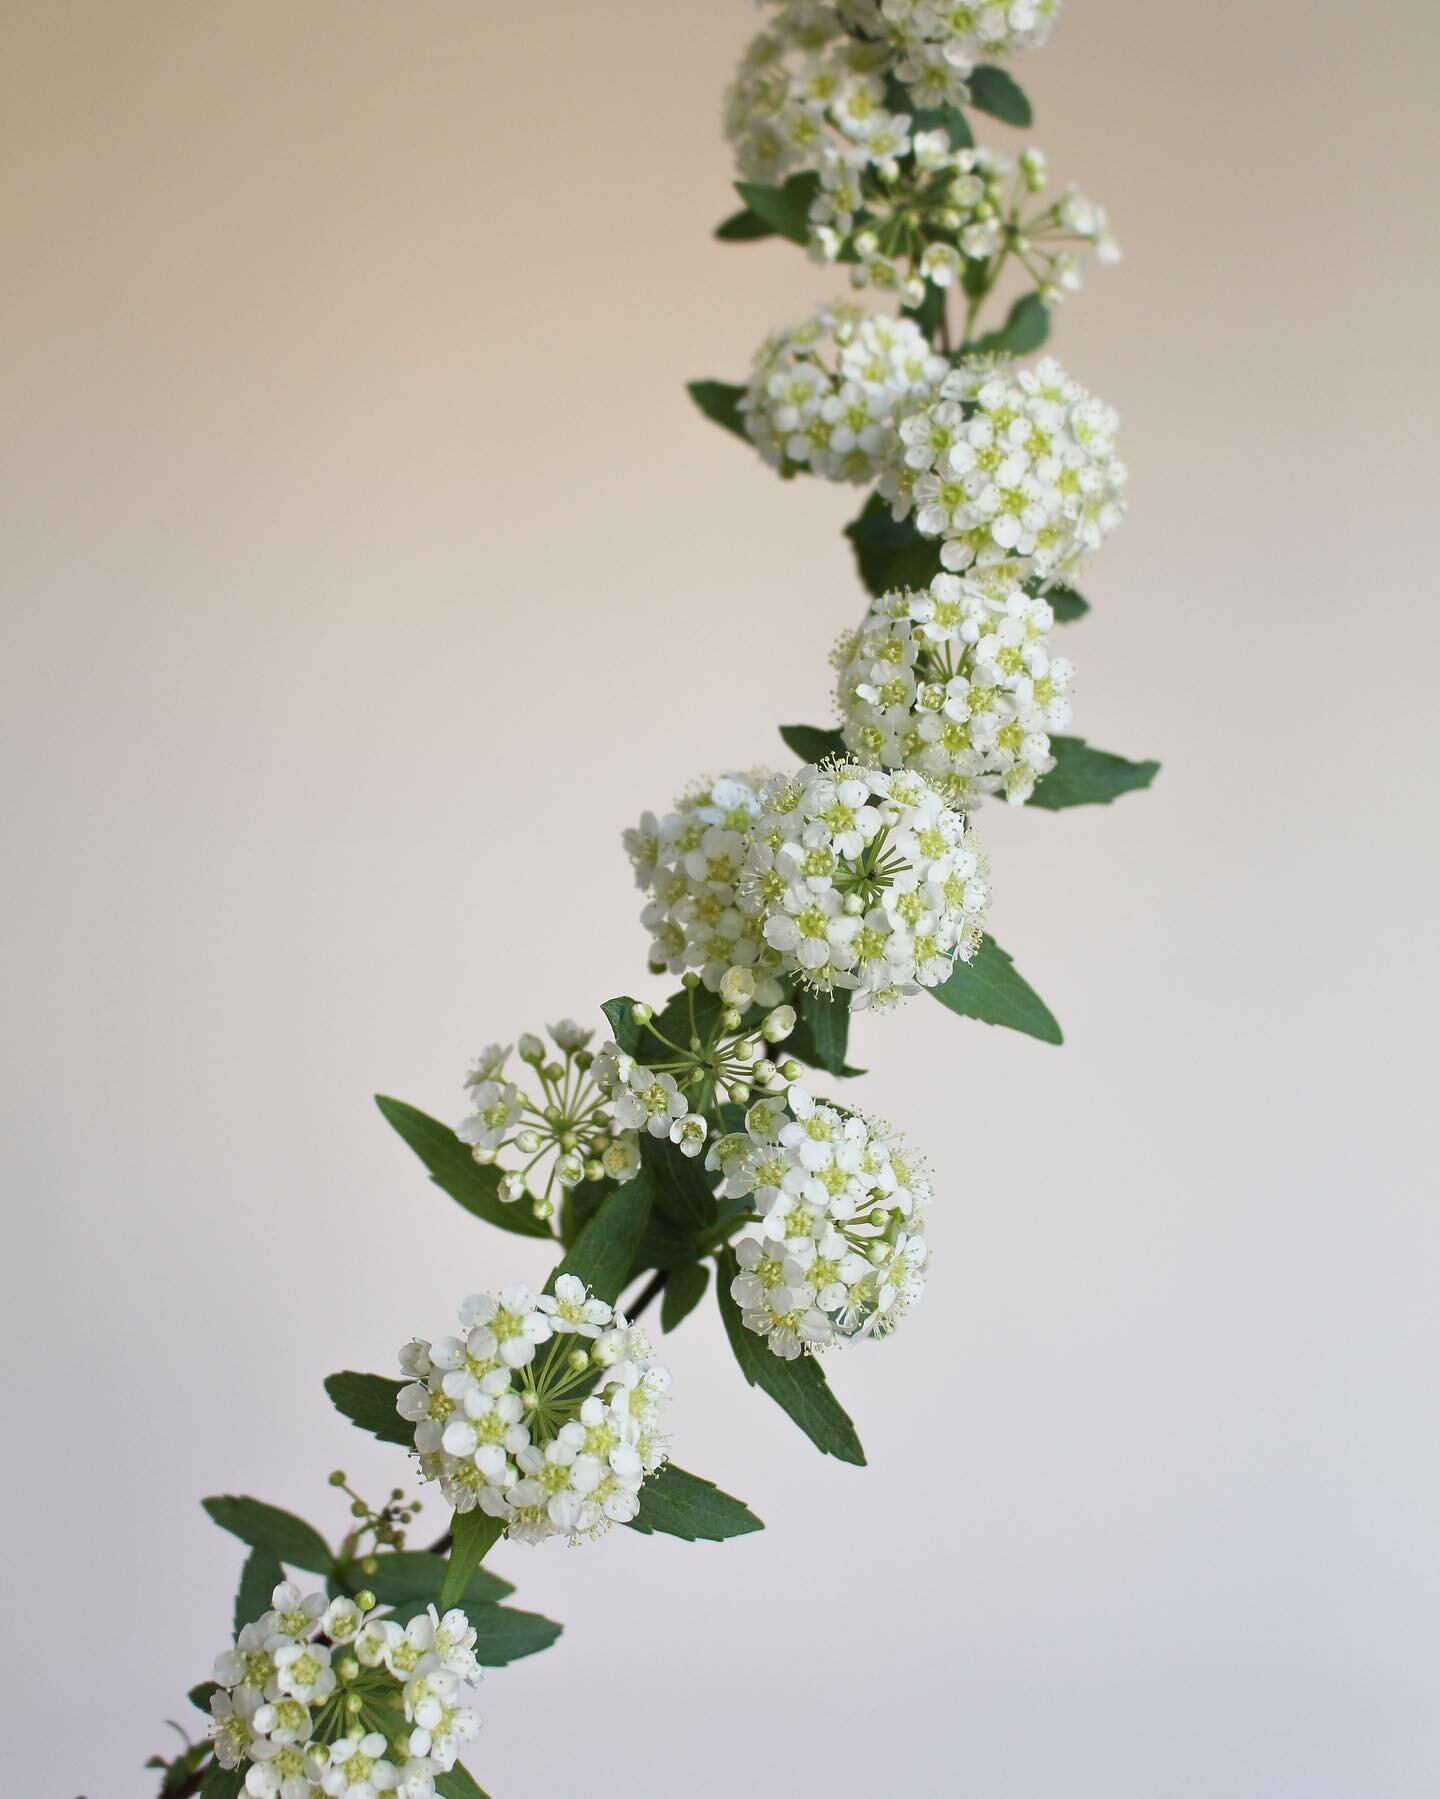 If you could grow one variety of flower/foliage with endless supply in your own yard, what would it be? This variety of spirea would be high on my wish list!